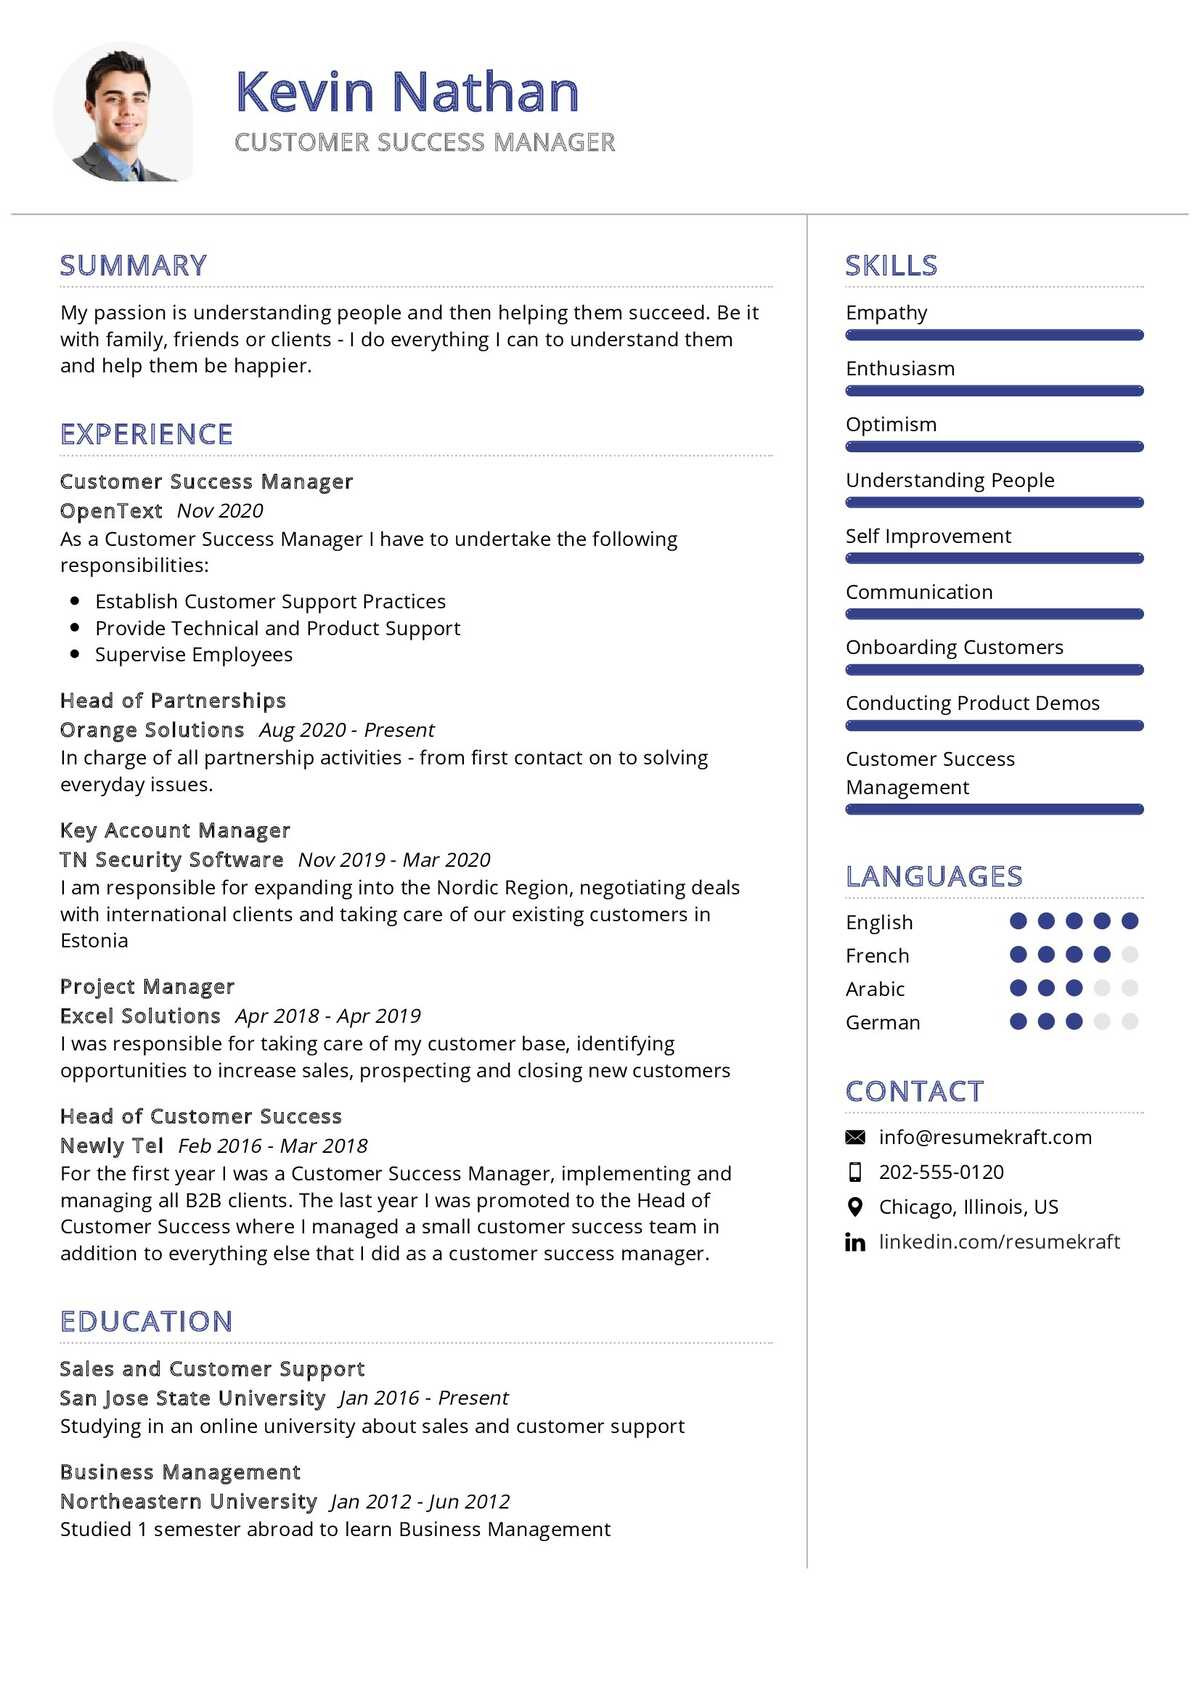 Customer Service Manager Resume Templates Samples Customer Success Manager Resume Sample 2021 Writing Guide …